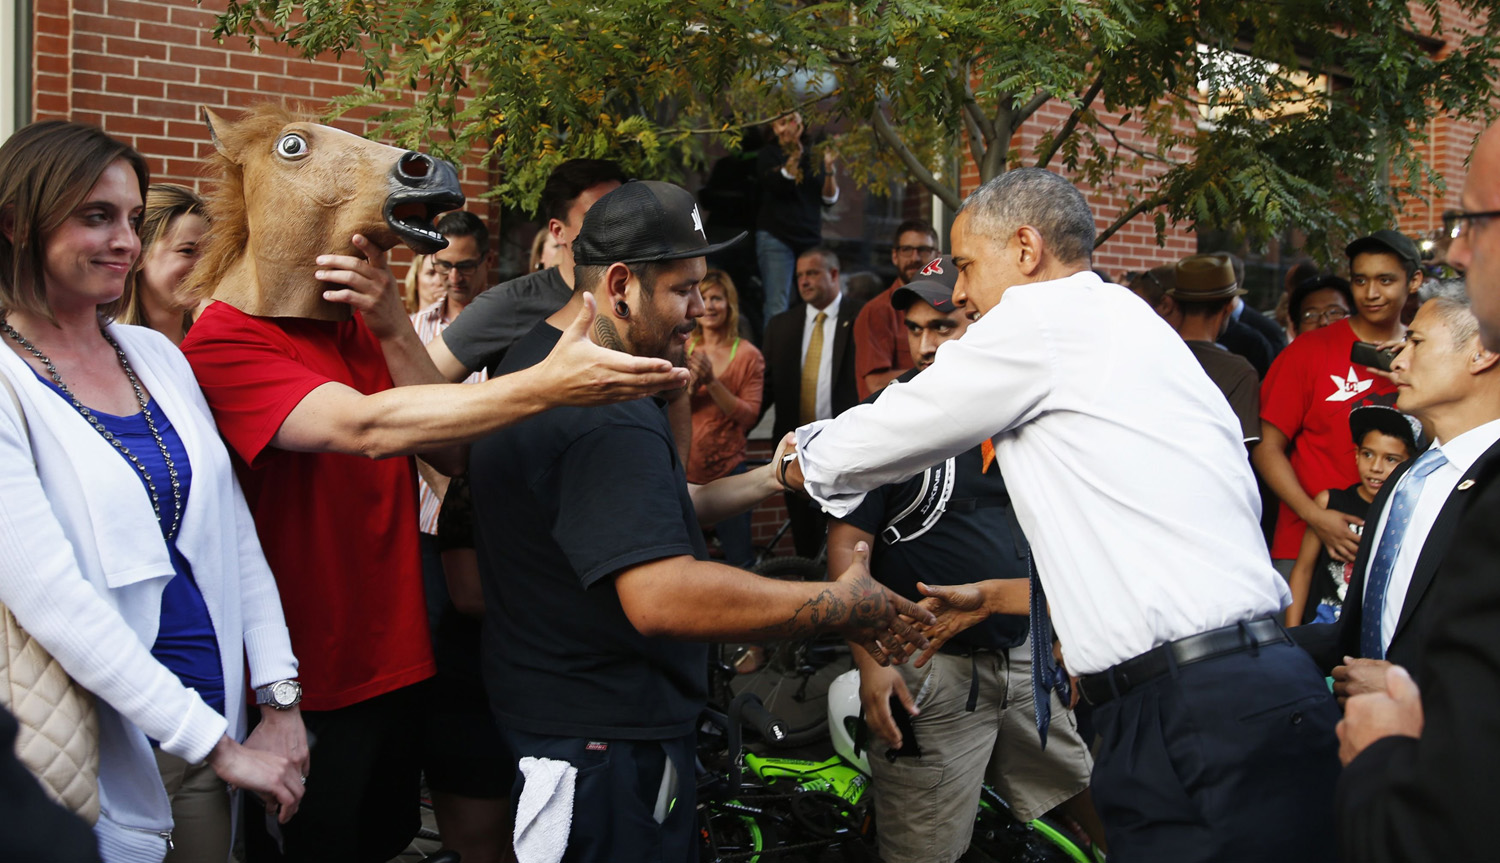 A man wearing a horse mask reaches out to shake hands with U.S. President Barack Obama during a walkabout in Denver